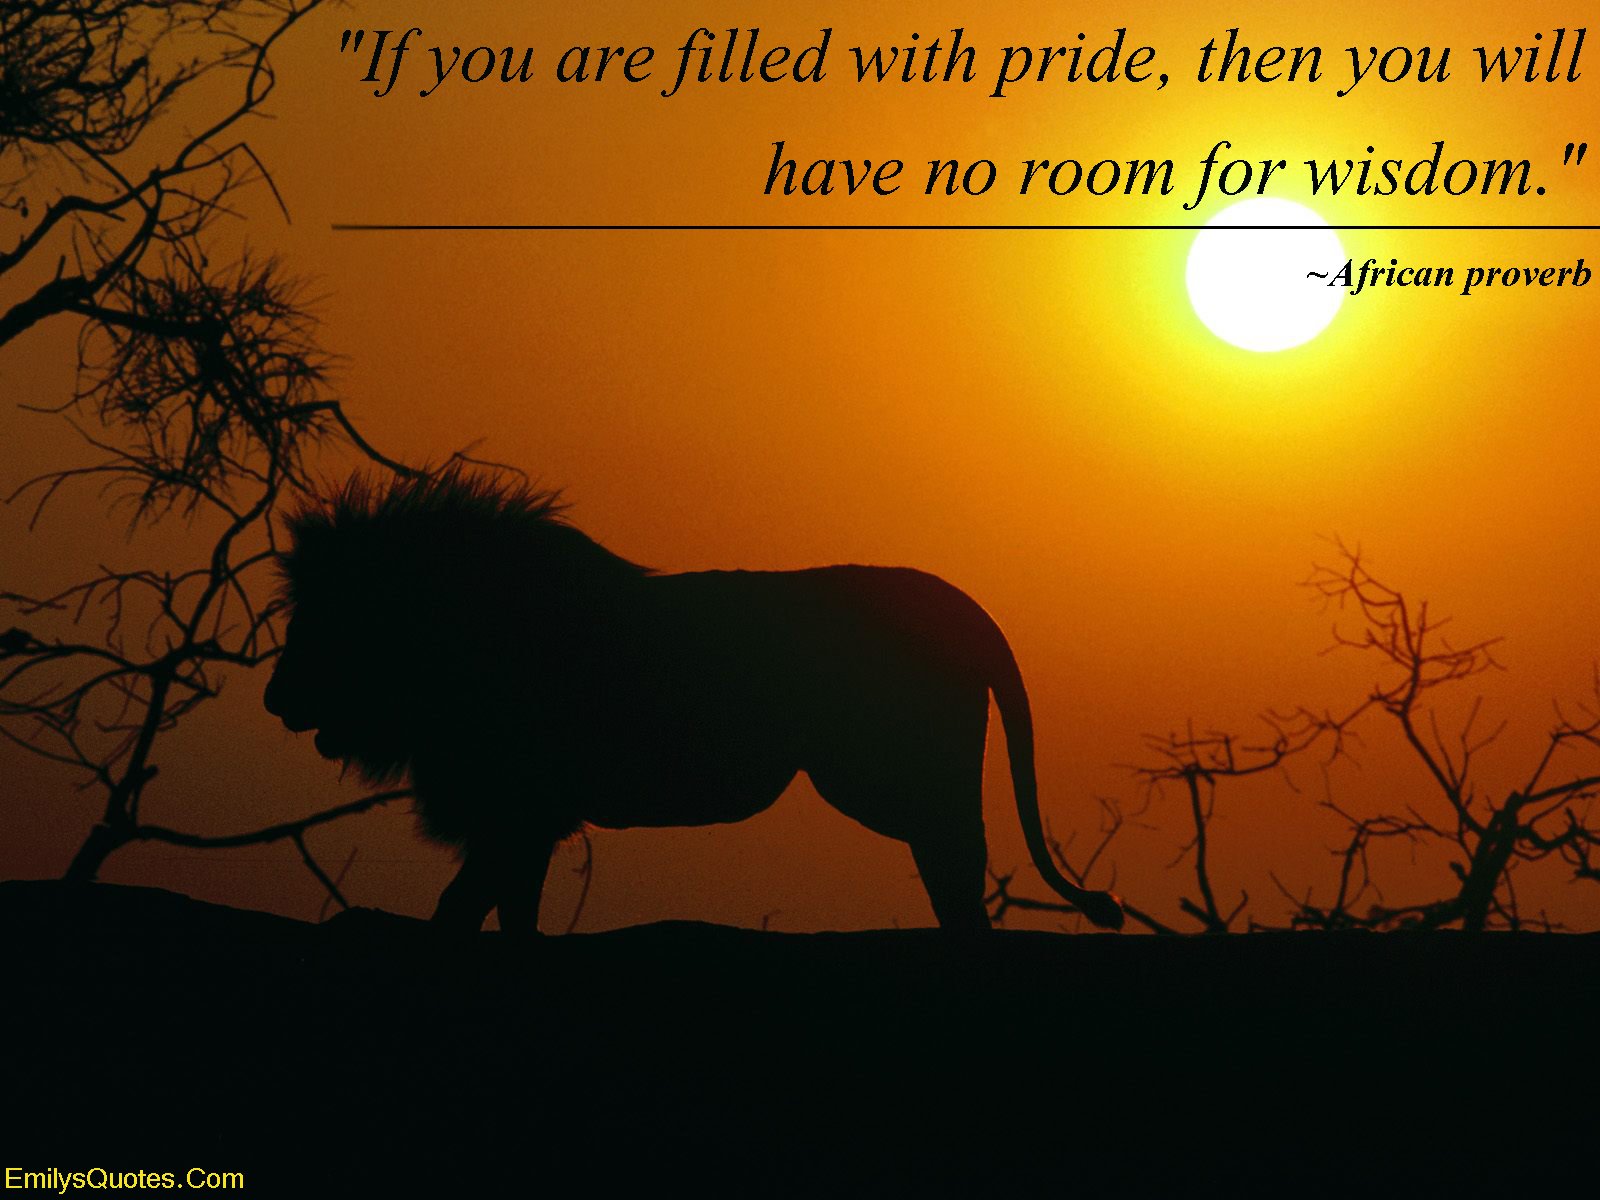 If you are filled with pride, then you will have no room for wisdom